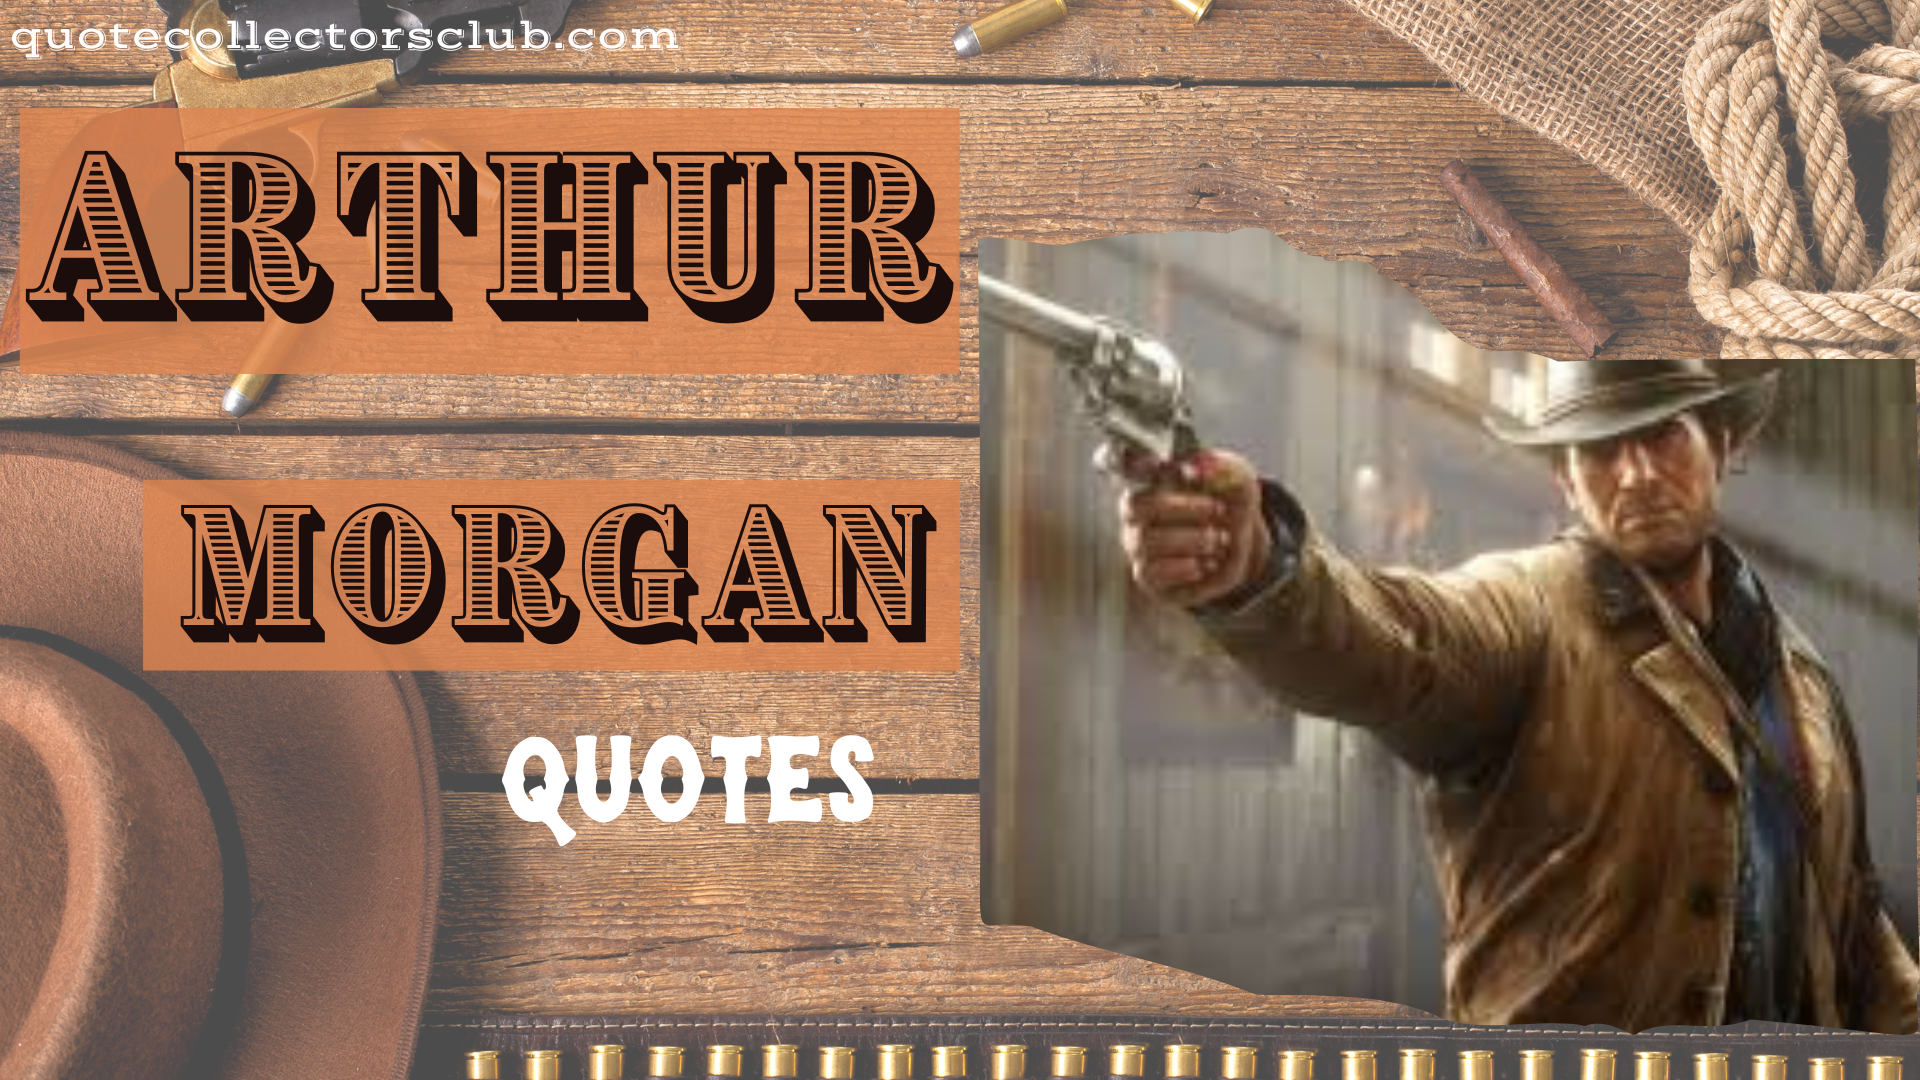 The Best Arthur Morgan Quotes From Red Dead Redemption 2 - Quote Collectors  Club